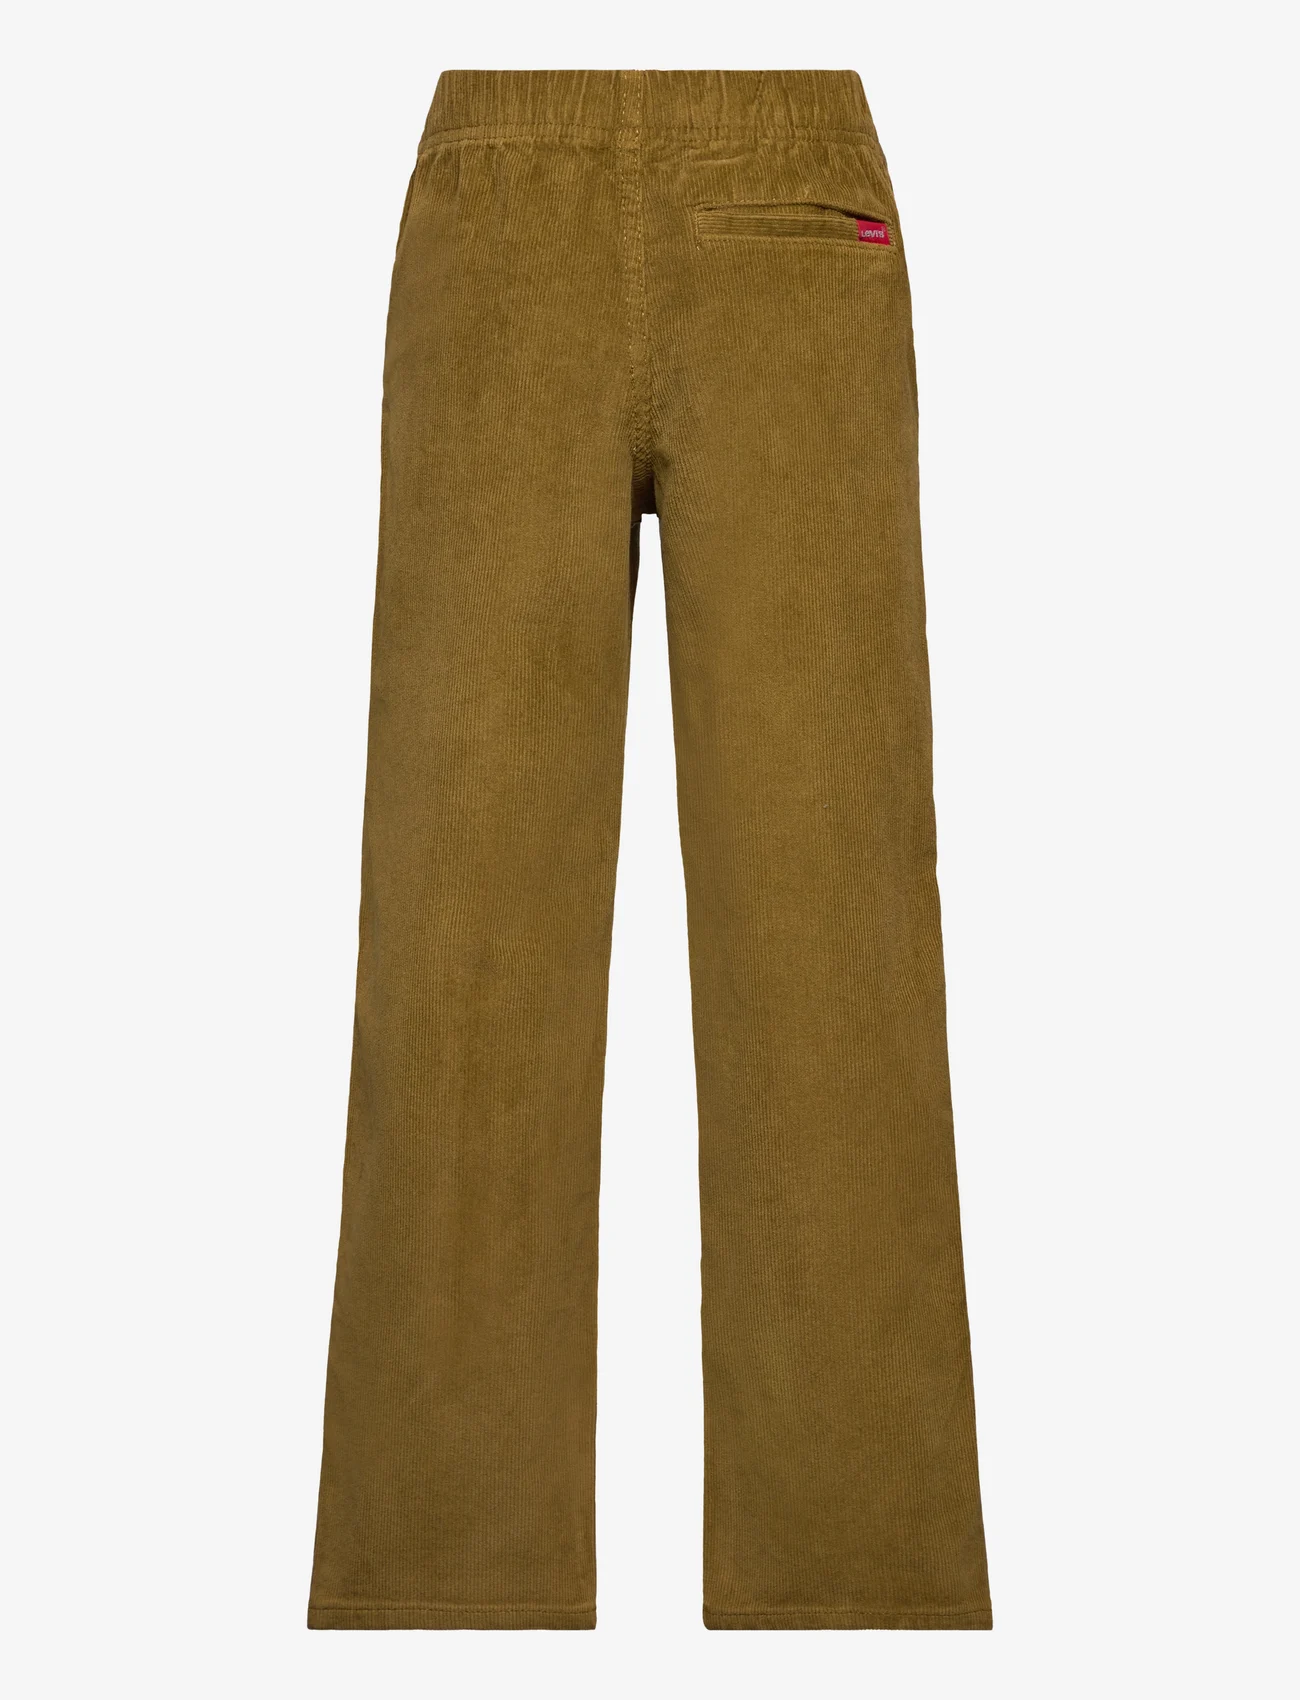 Levi's - Levi's® Stay Loose Tapered Corduroy Pants - kinder - brown - 1